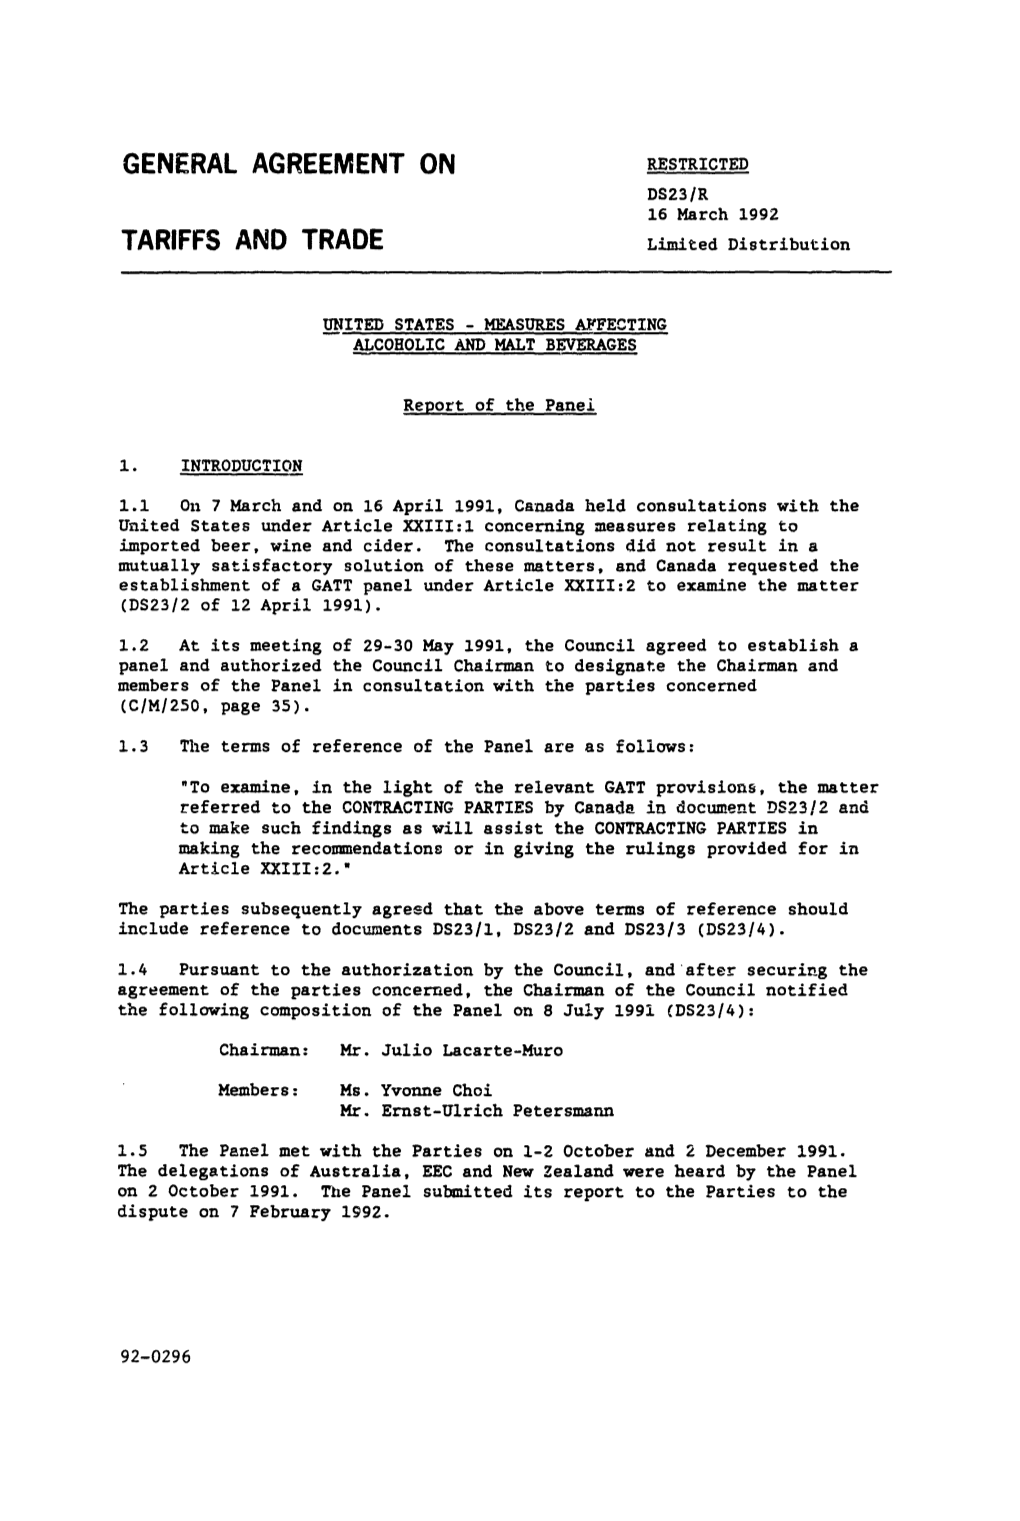 GENERAL AGREEMENT on RESTRICTED DS23/R 16 March 1992 TARIFFS and TRADE Limited Distribution